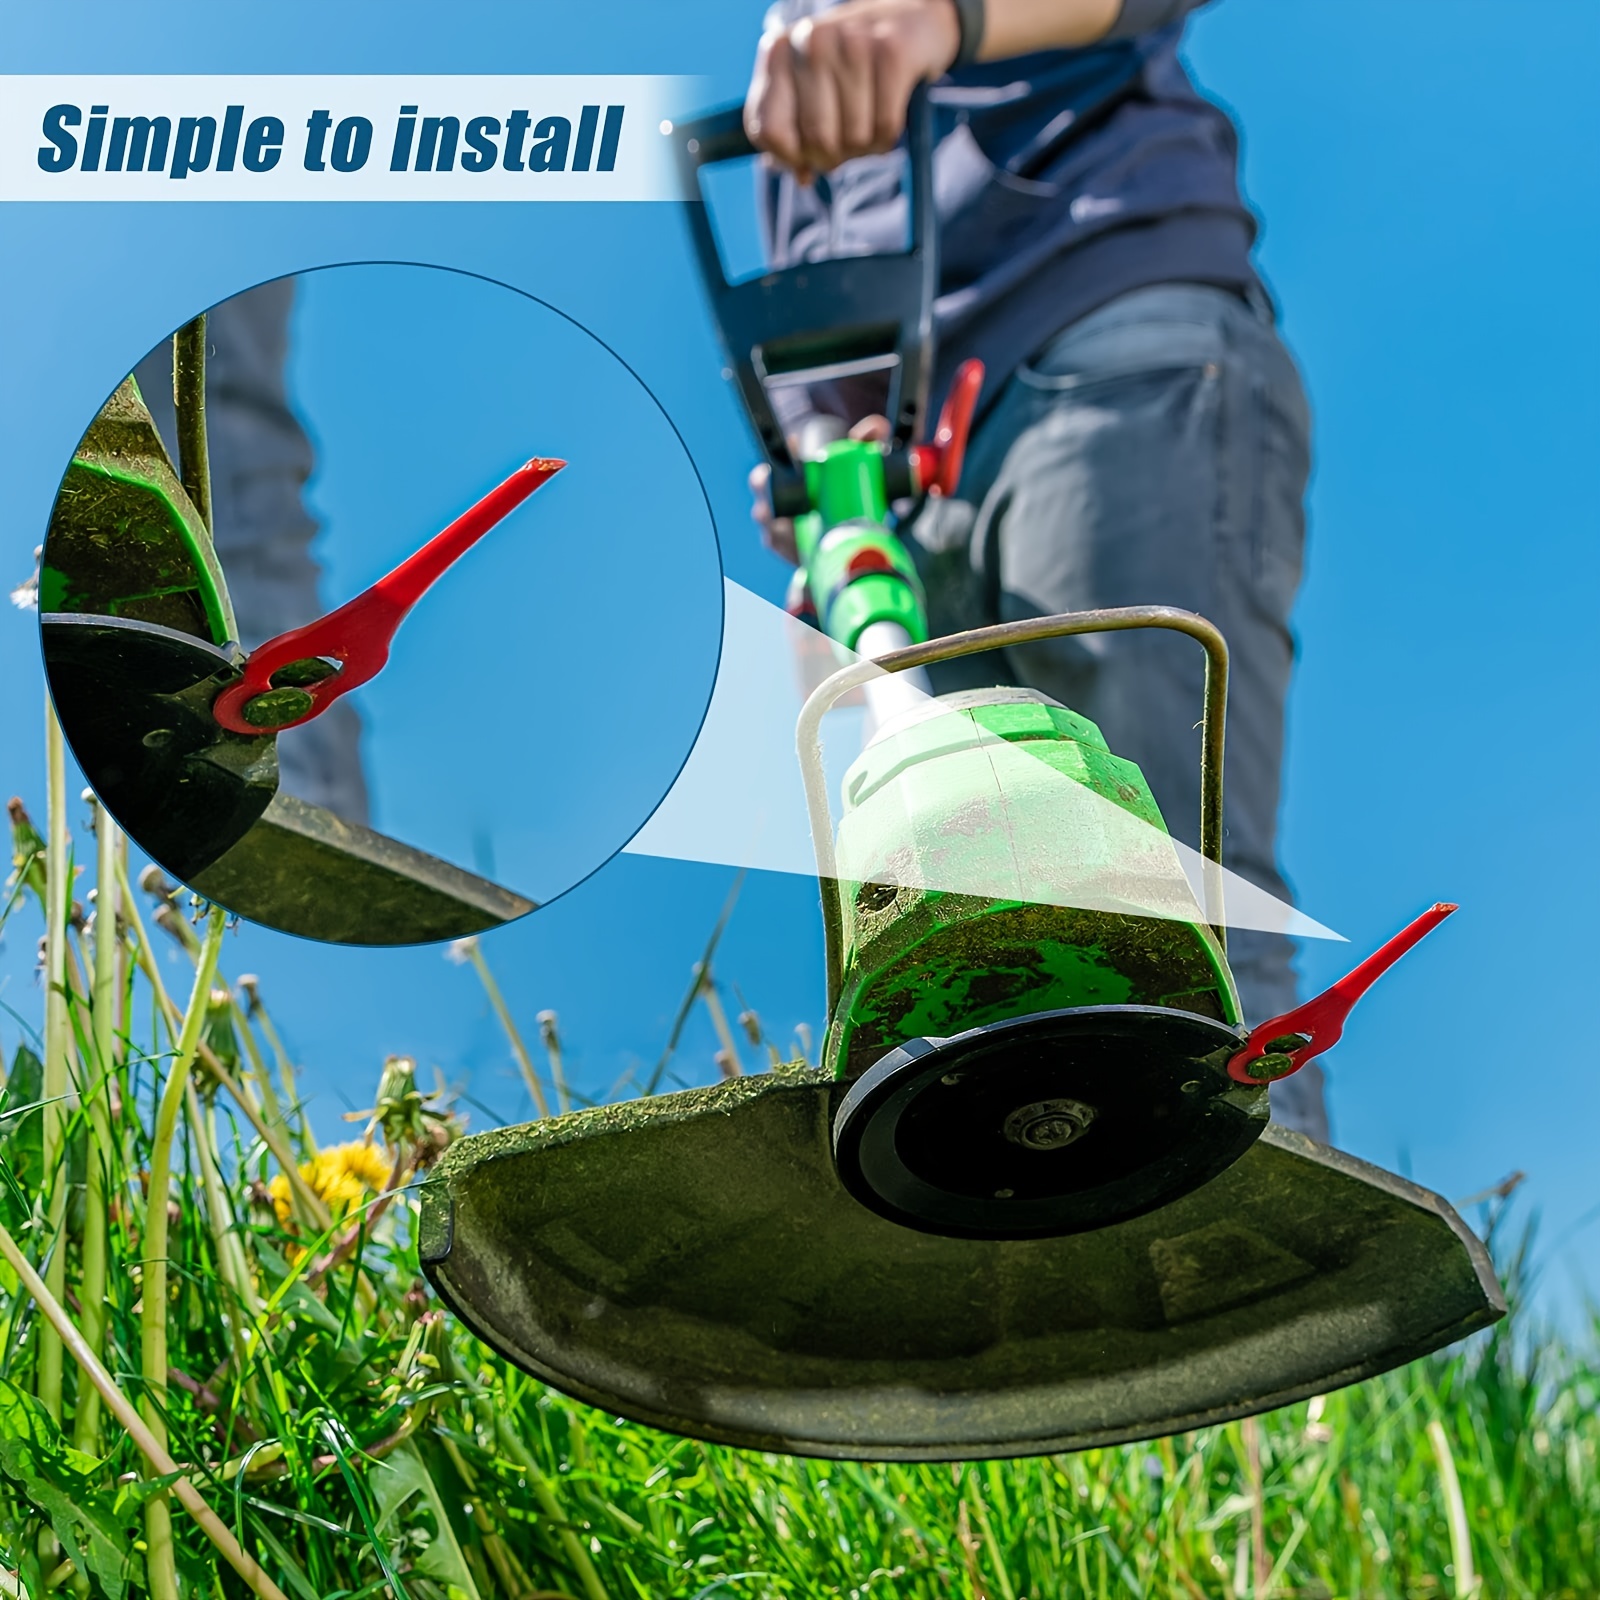 30pcs Plastic Machine Trimming Blades Replacement Plastic Blades  Accessories Trimmer Grass Mowing Nylon Blades Garden Lawn Mower Accessories  Tools